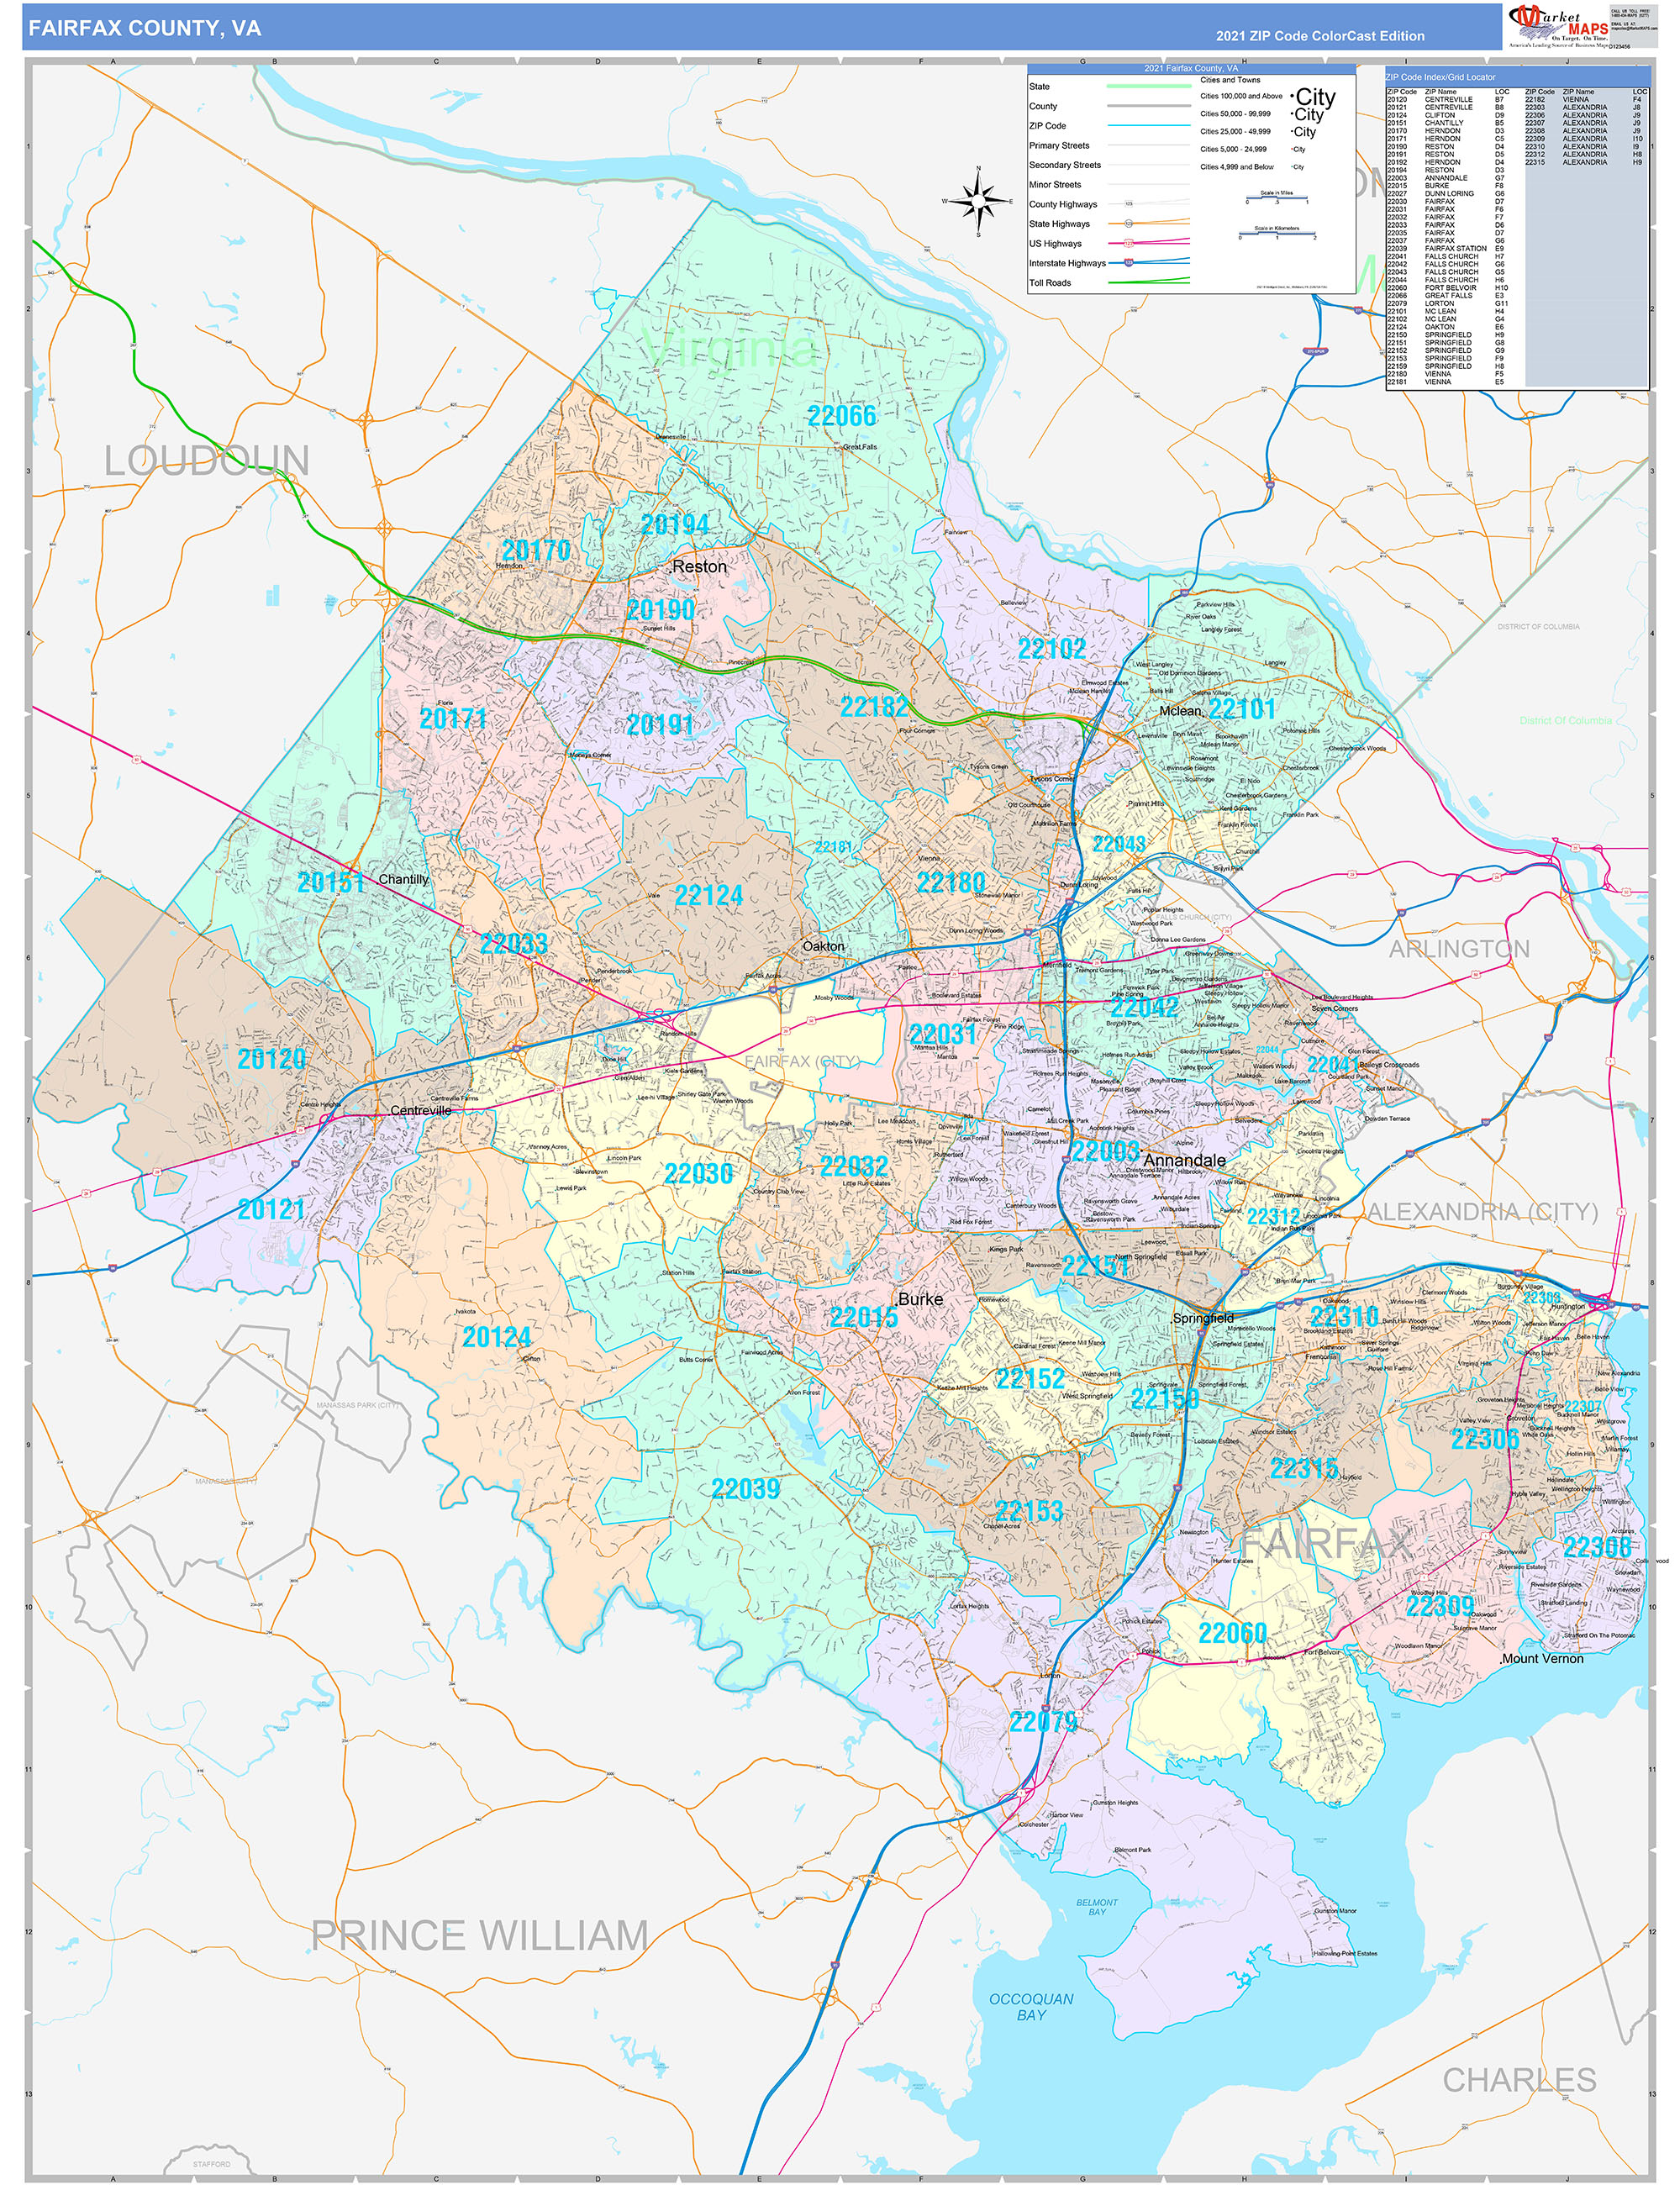 Fairfax County, VA Wall Map Color Cast Style by MarketMAPS - MapSales